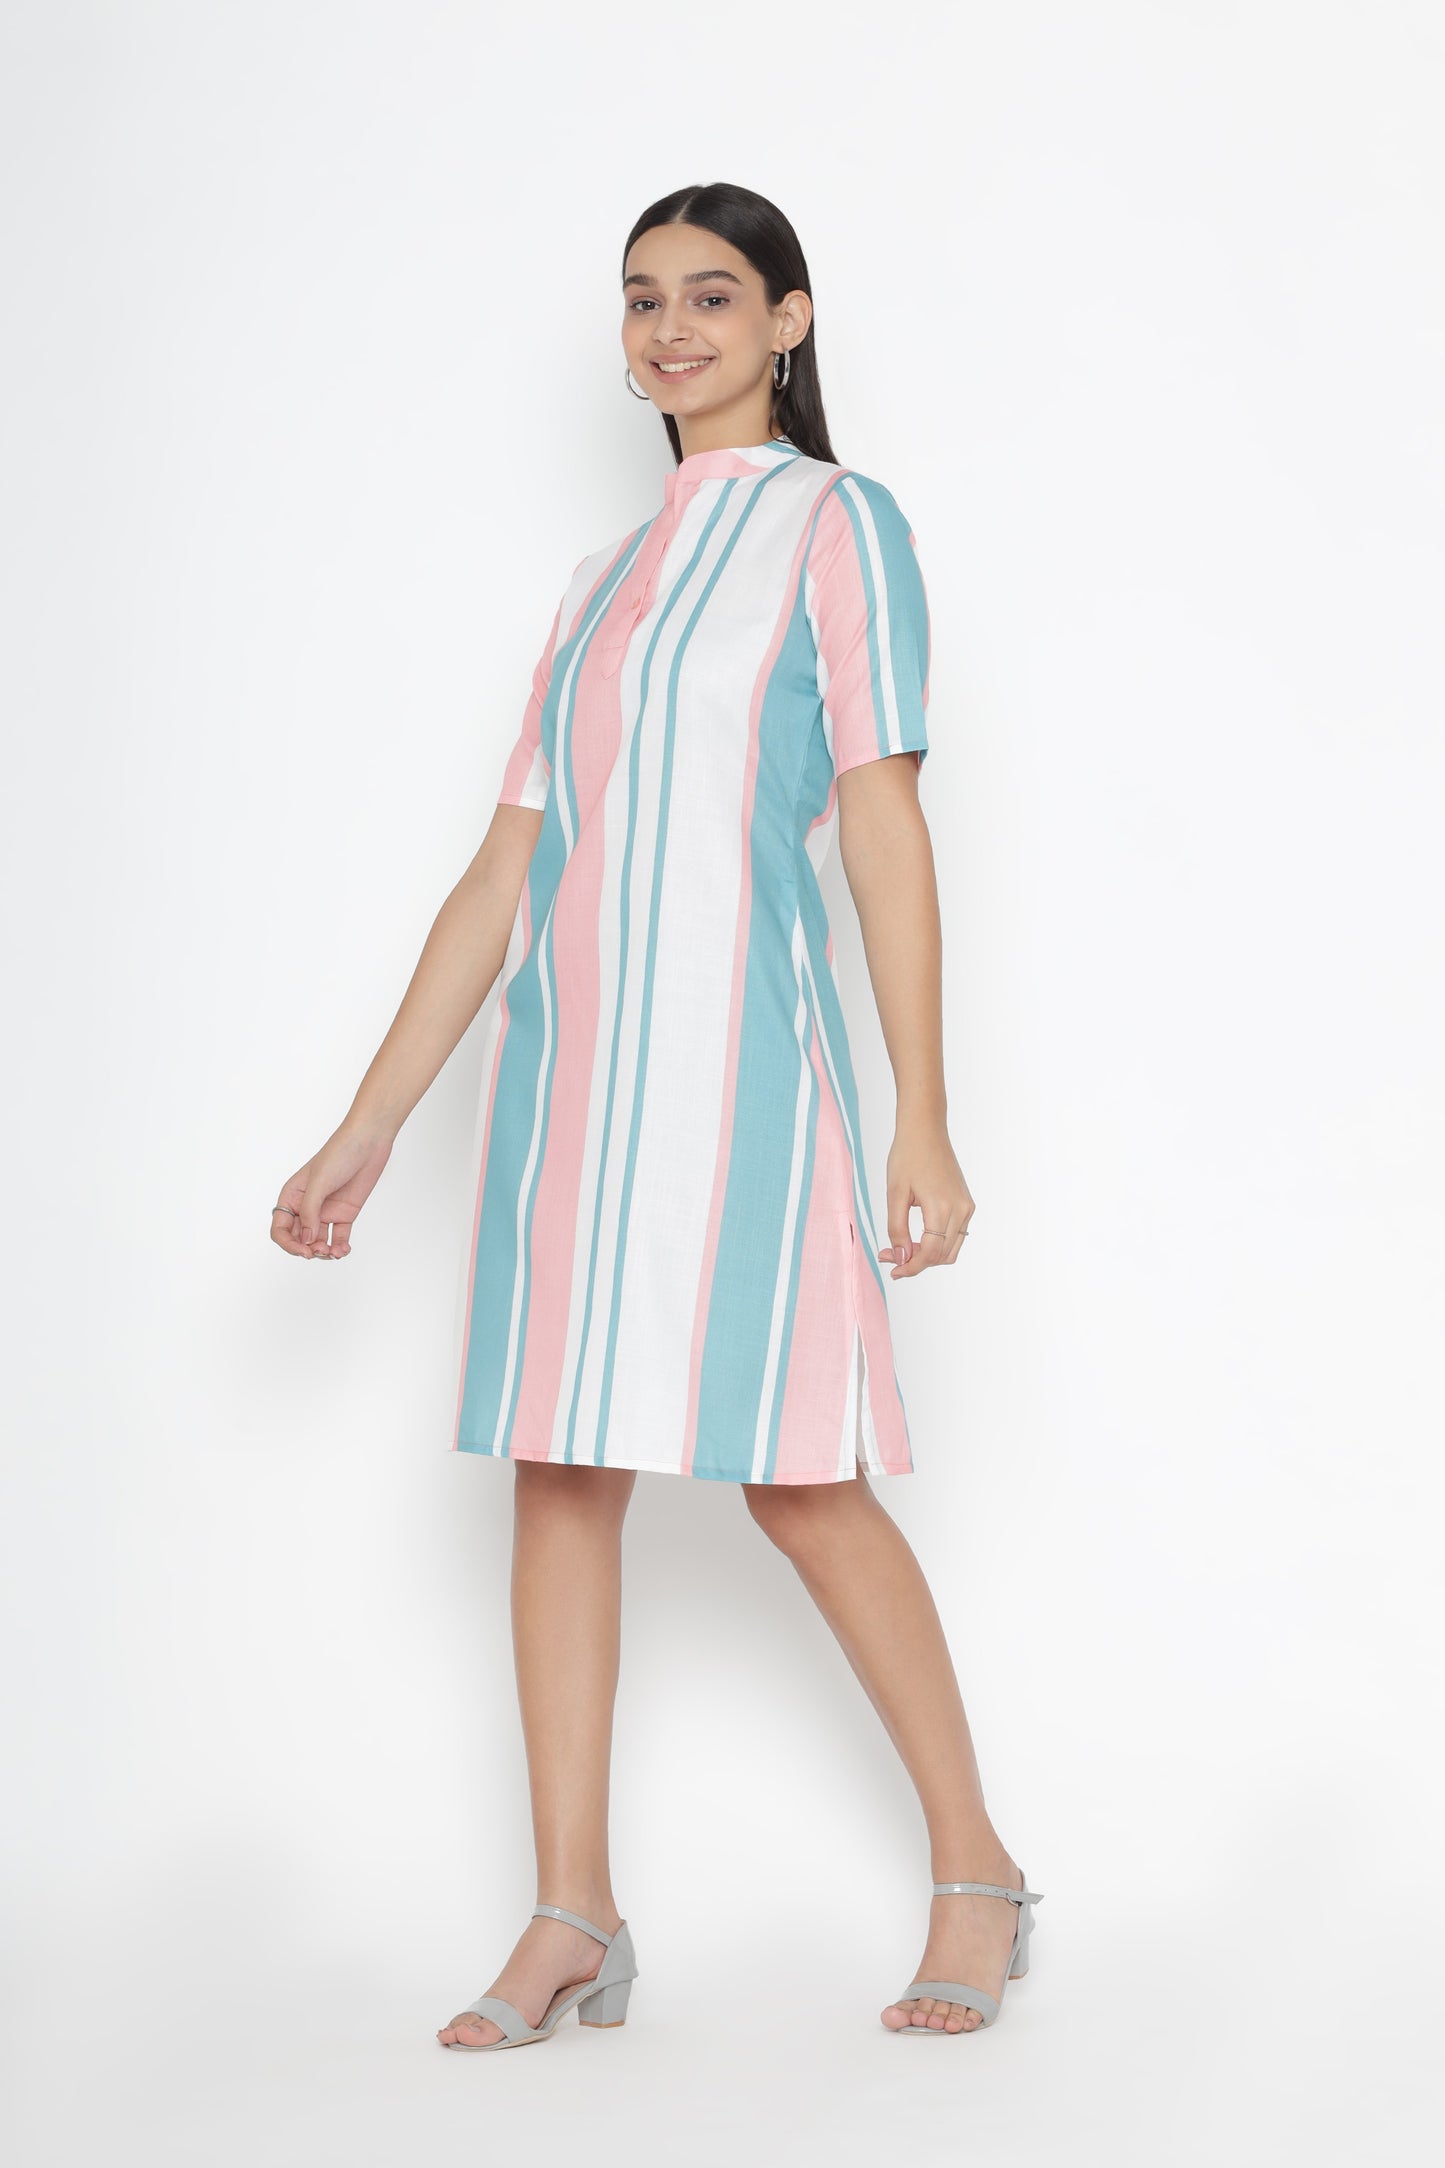  GET 50% OFF ON OUR LATEST WOMEN’S COLLECTIONS | OCTICS Shop Now Mandarin Collar Striped Printed A-Line Dress